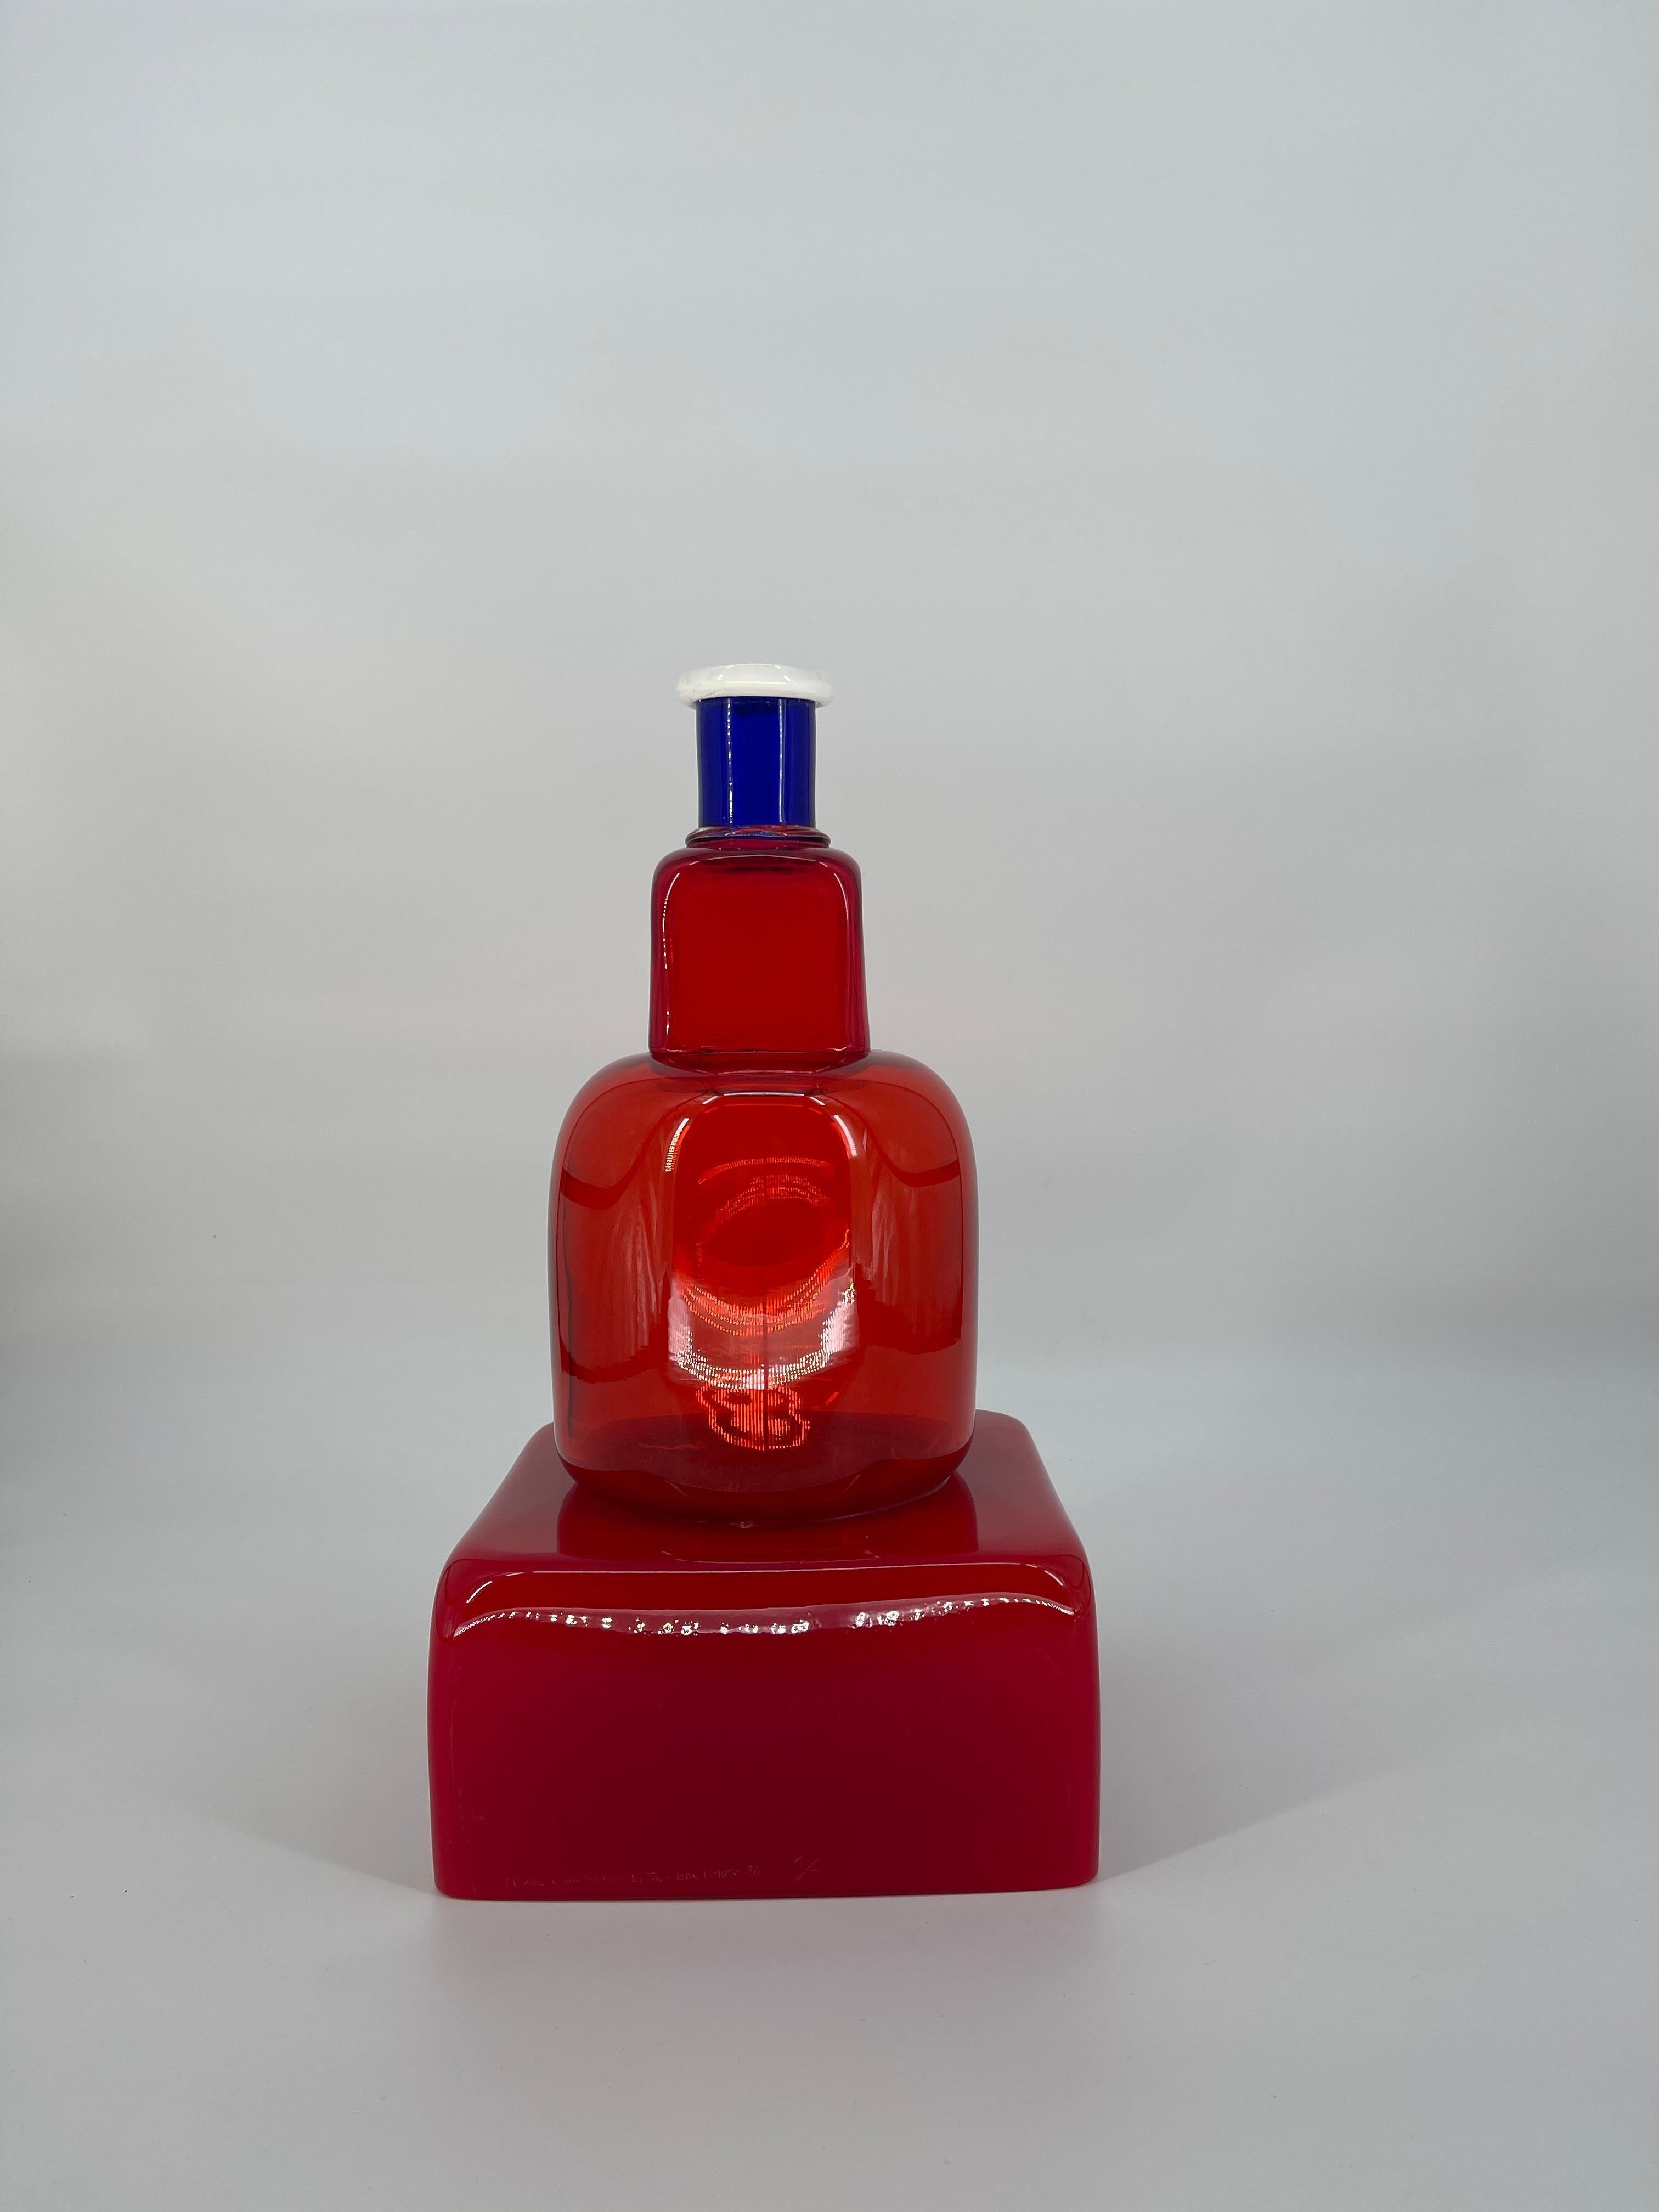 Marco Zanini for Memphis, designed in 1986
KITA, A RED CLEAR GLASS VASE
Pyramid shaped red vase with white and blue detailing
Engraved mark M. Zanini per Memphis by Toso Vetri d'arte Provo d'autore
This vase is number 1 of 7.